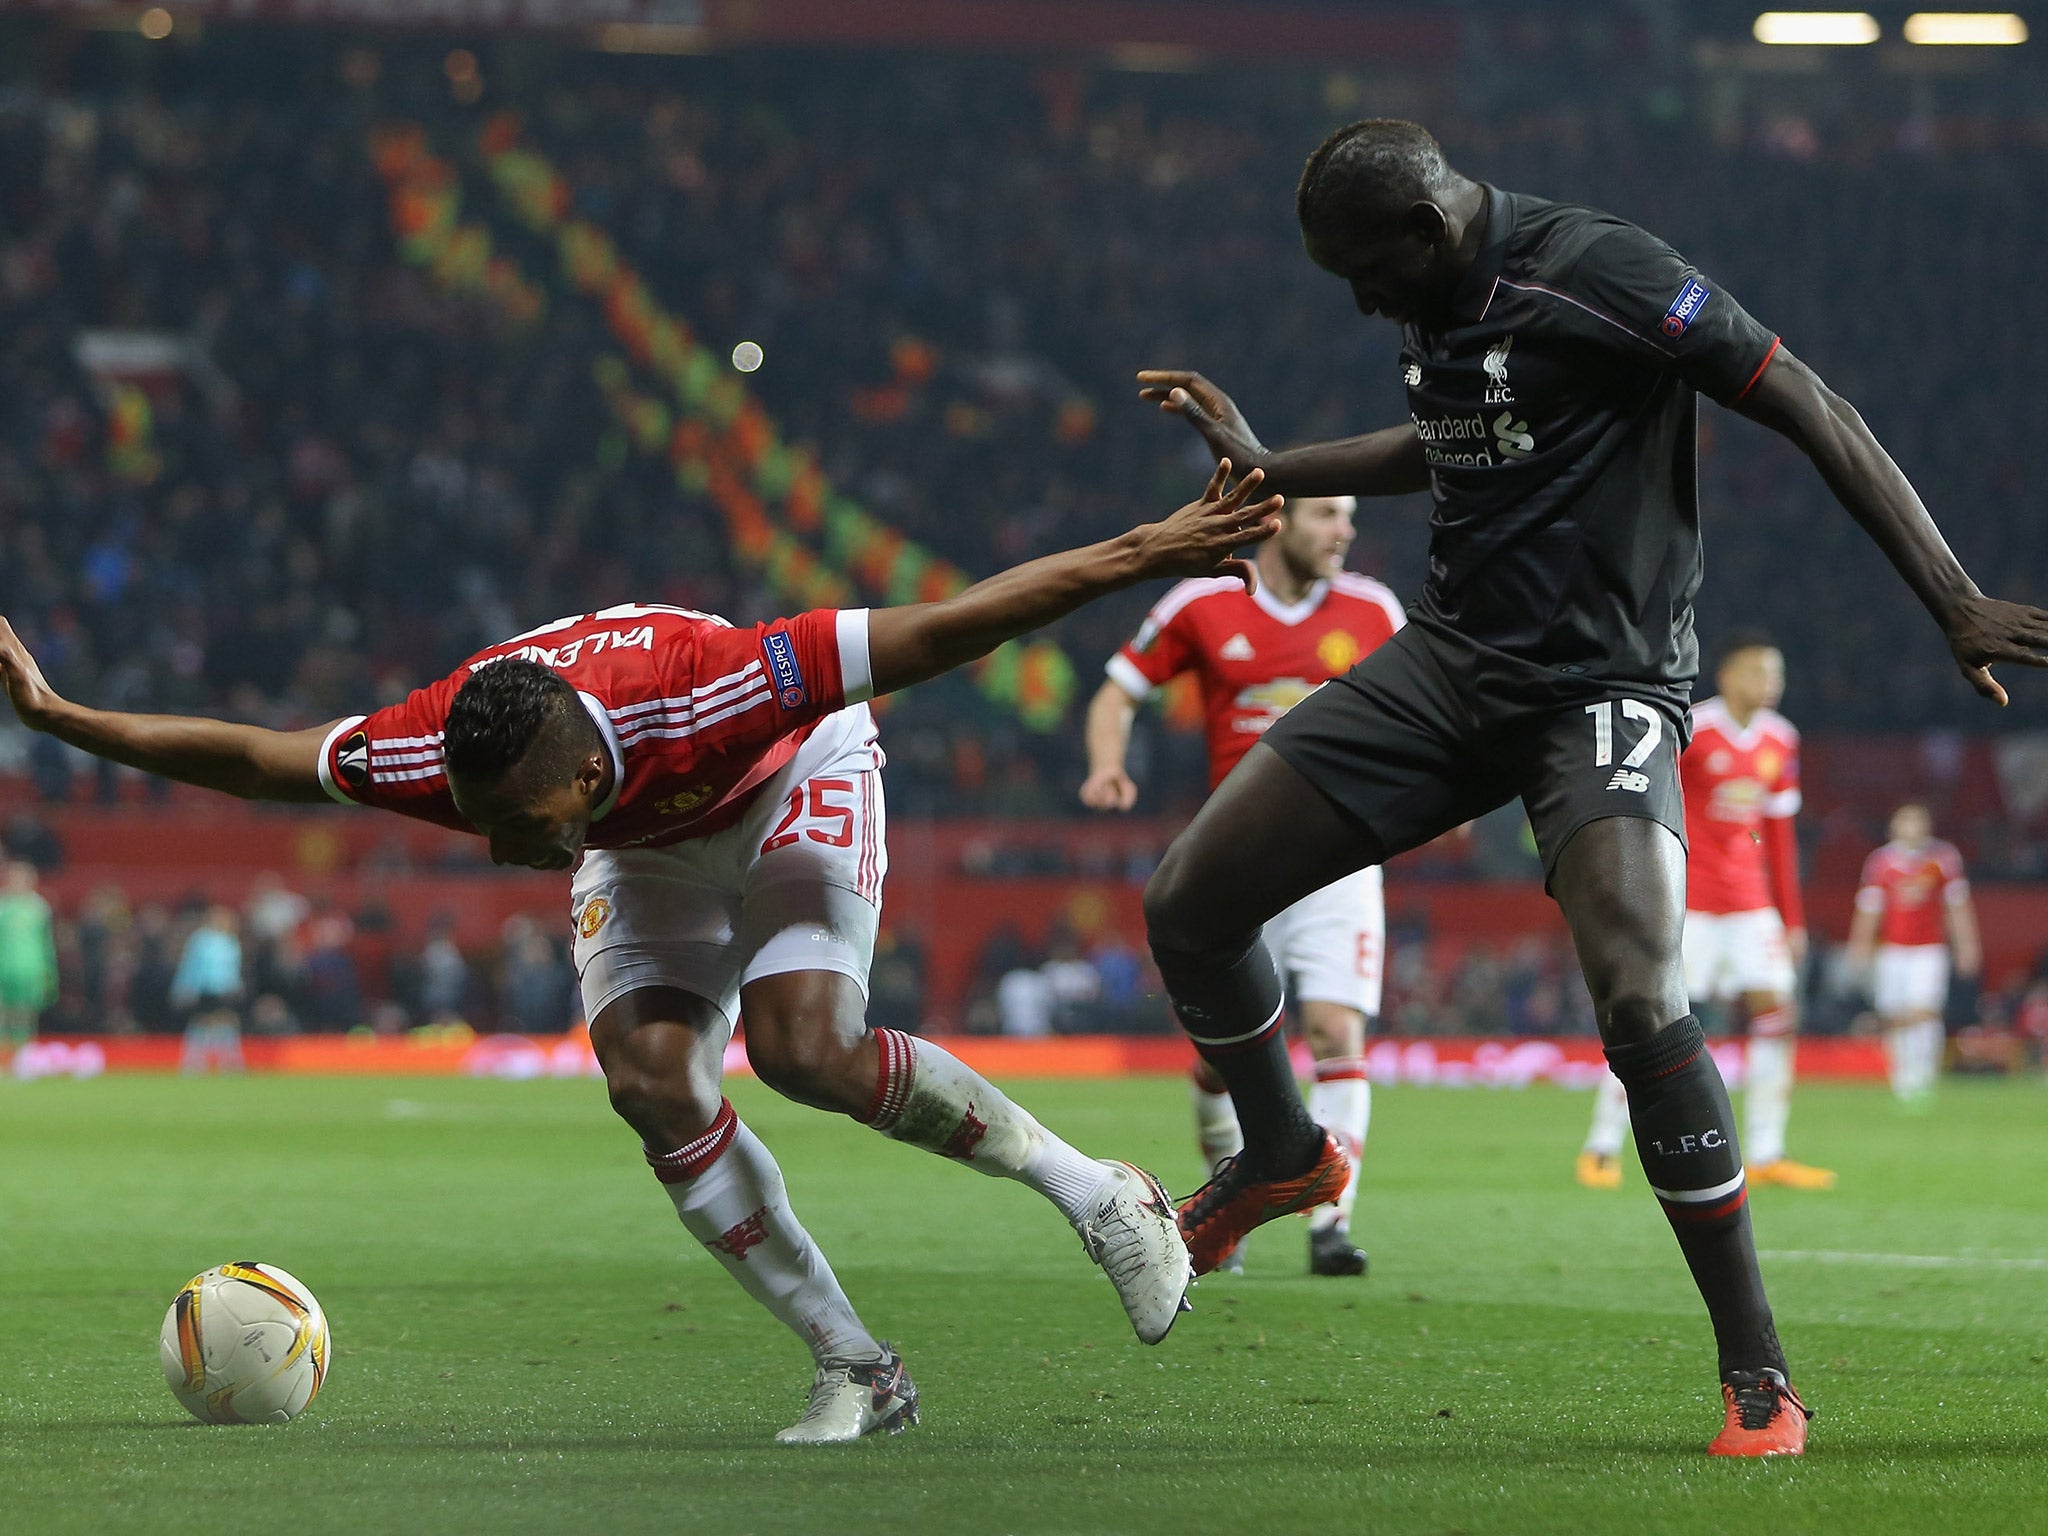 Sakho gave the positive test after last month's Europe League match at Manchester United